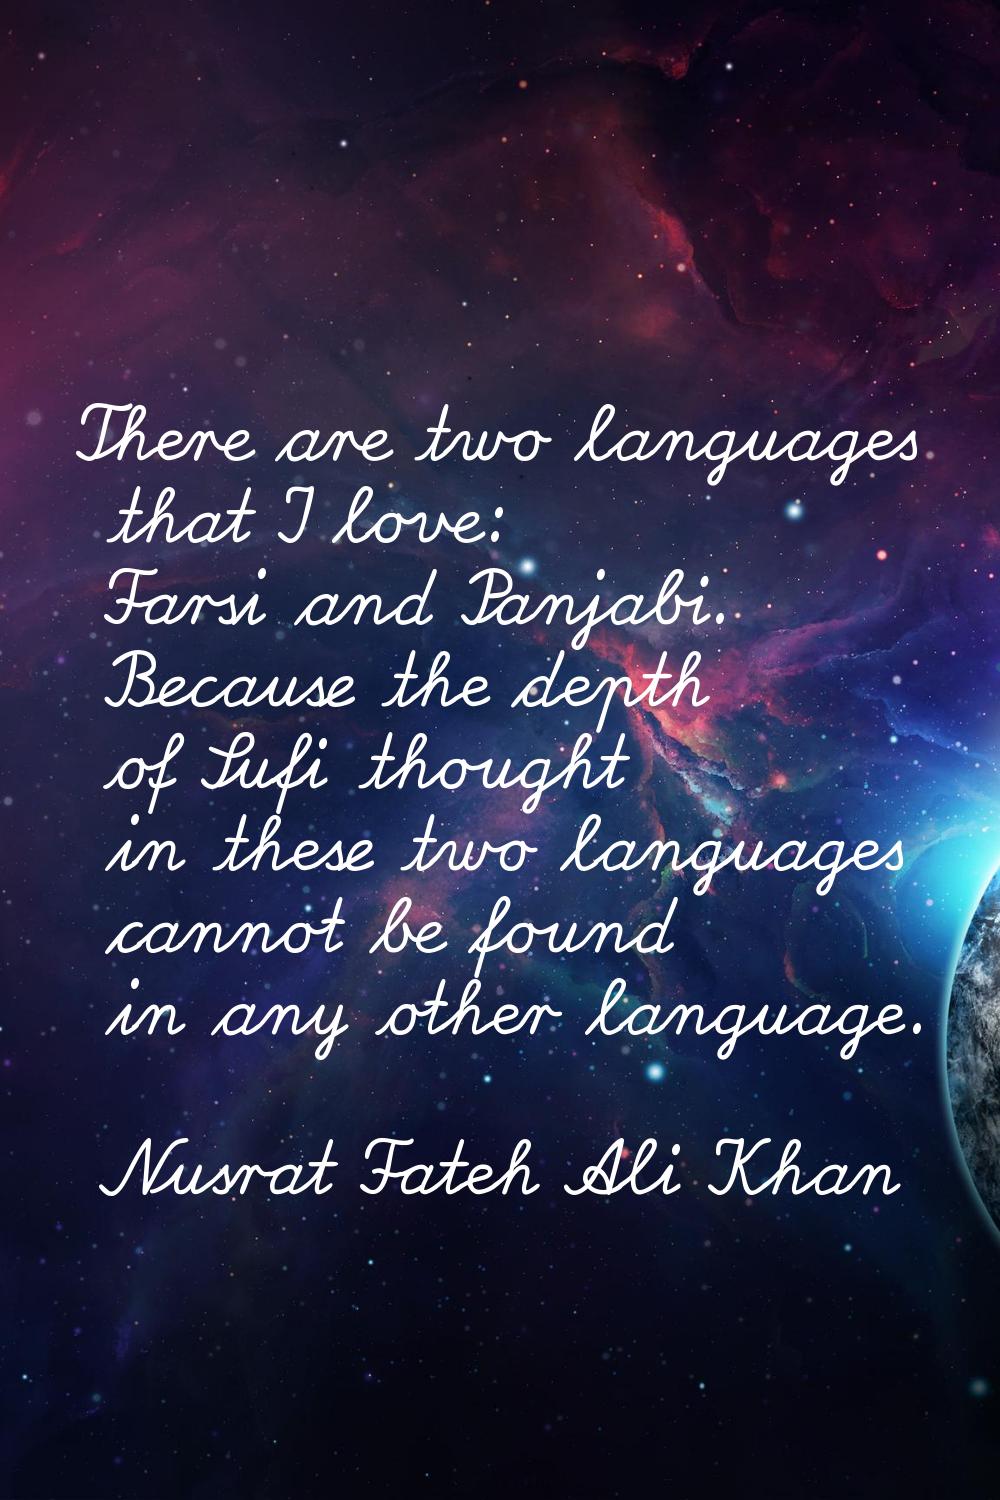 There are two languages that I love: Farsi and Panjabi. Because the depth of Sufi thought in these 